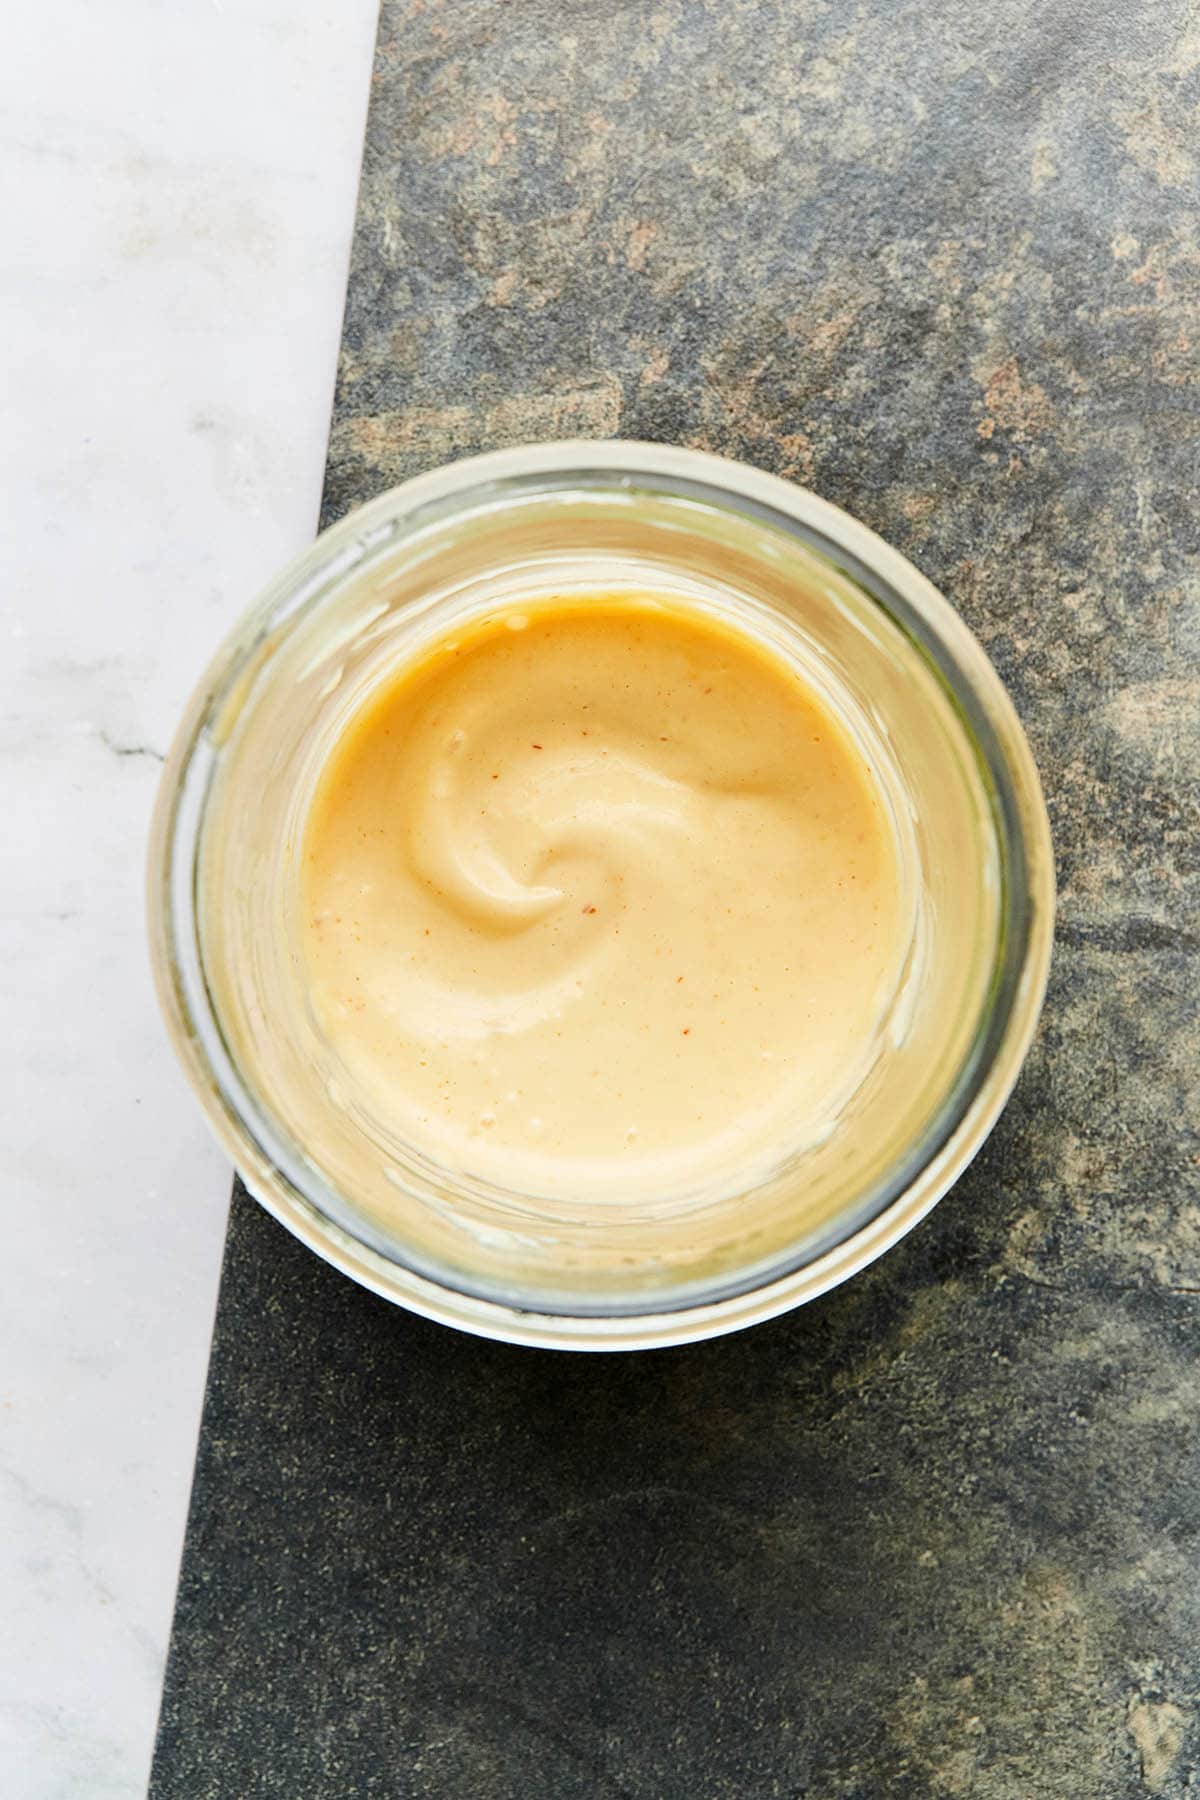 Overhead image of a jar of homemade spicy garlic aioli on a stone surface.